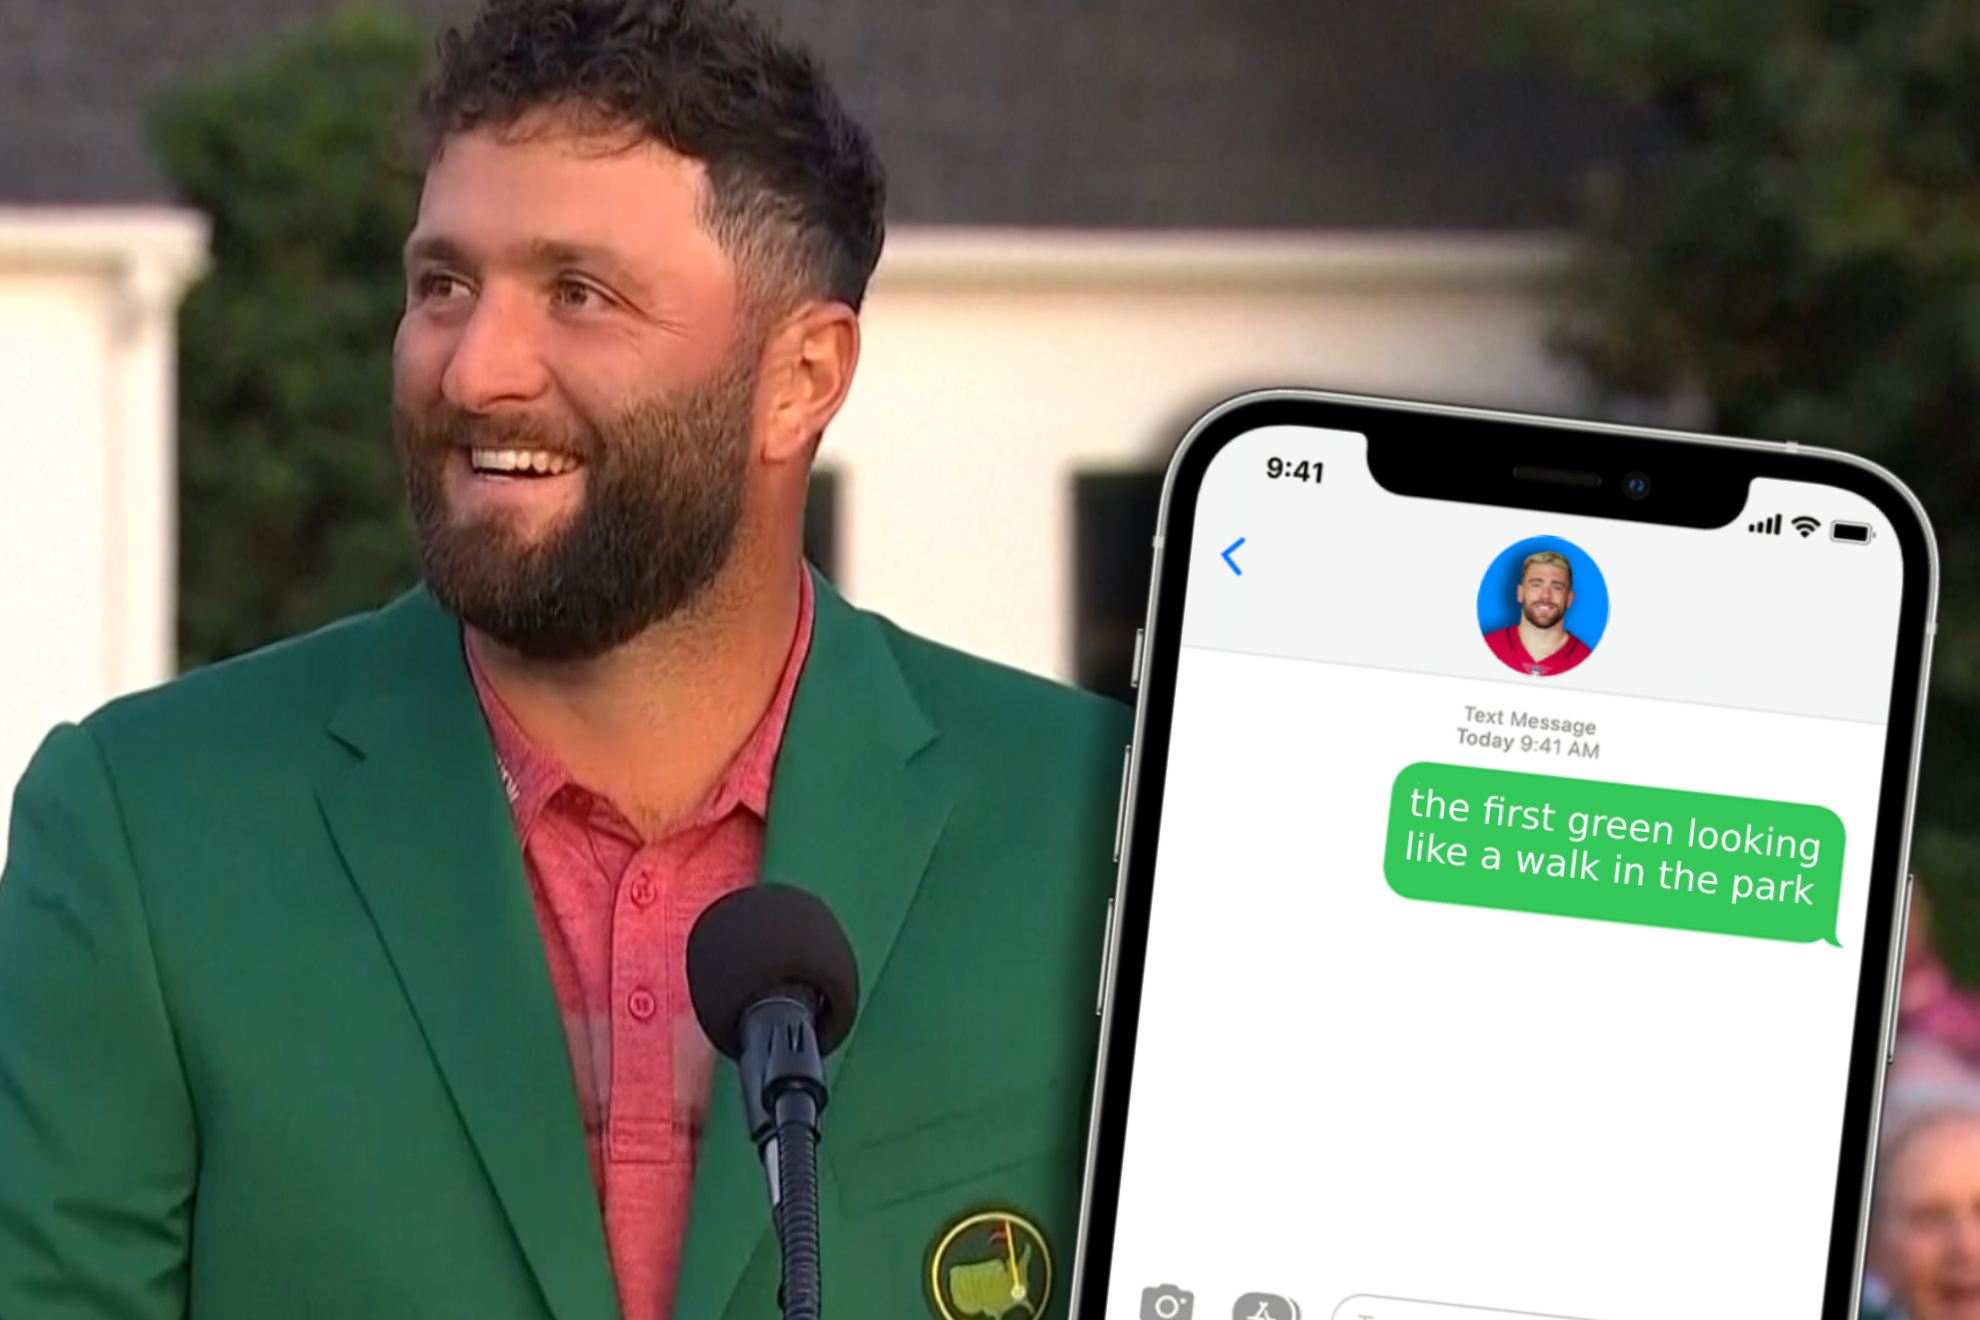 Rahm reveals the text message he received that made the whole of Augusta laugh